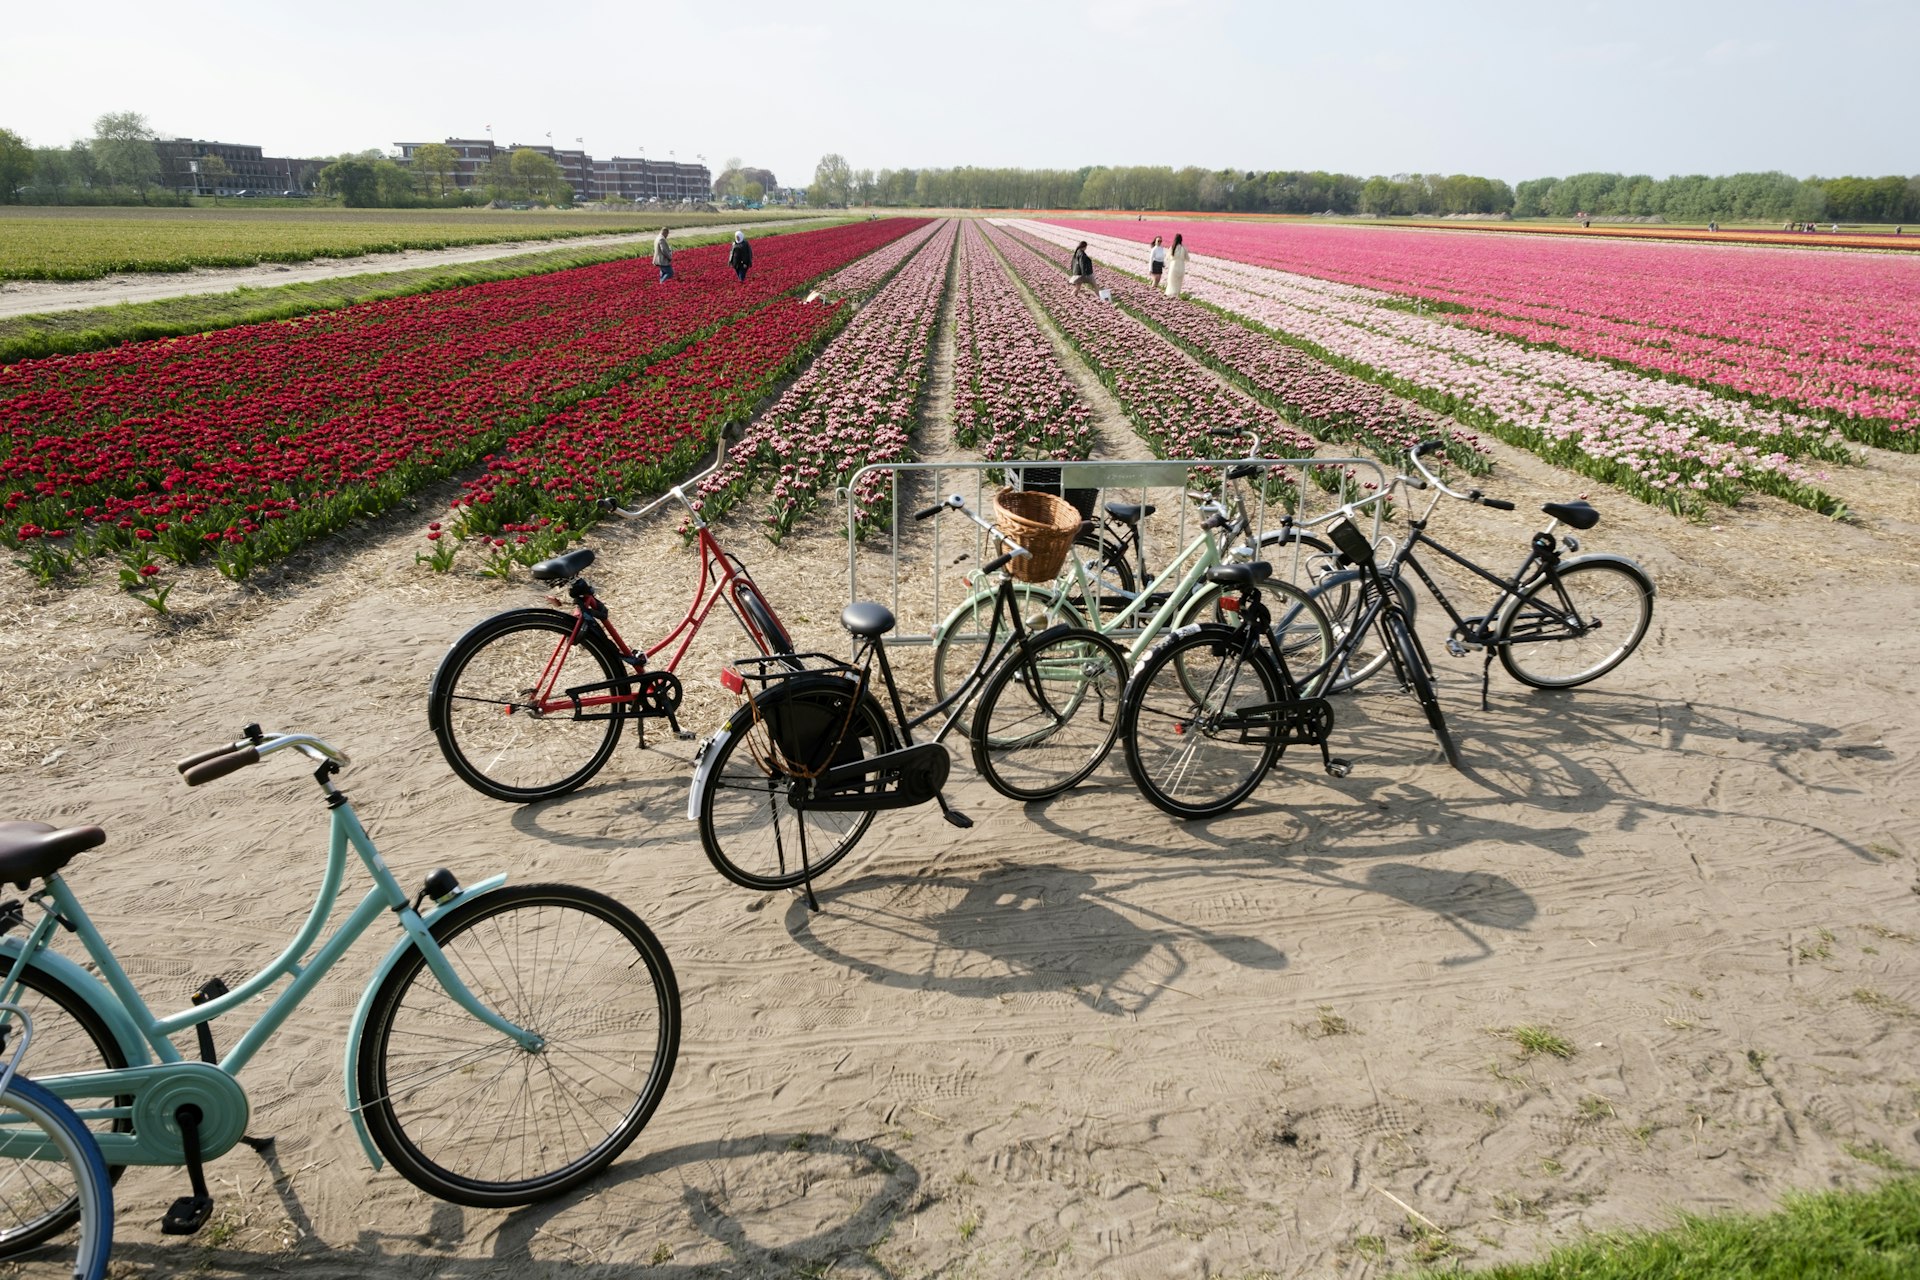 Bicycles are parked in front of rows of tulips as people explore fields, Noordwijk, Holland, Netherlands